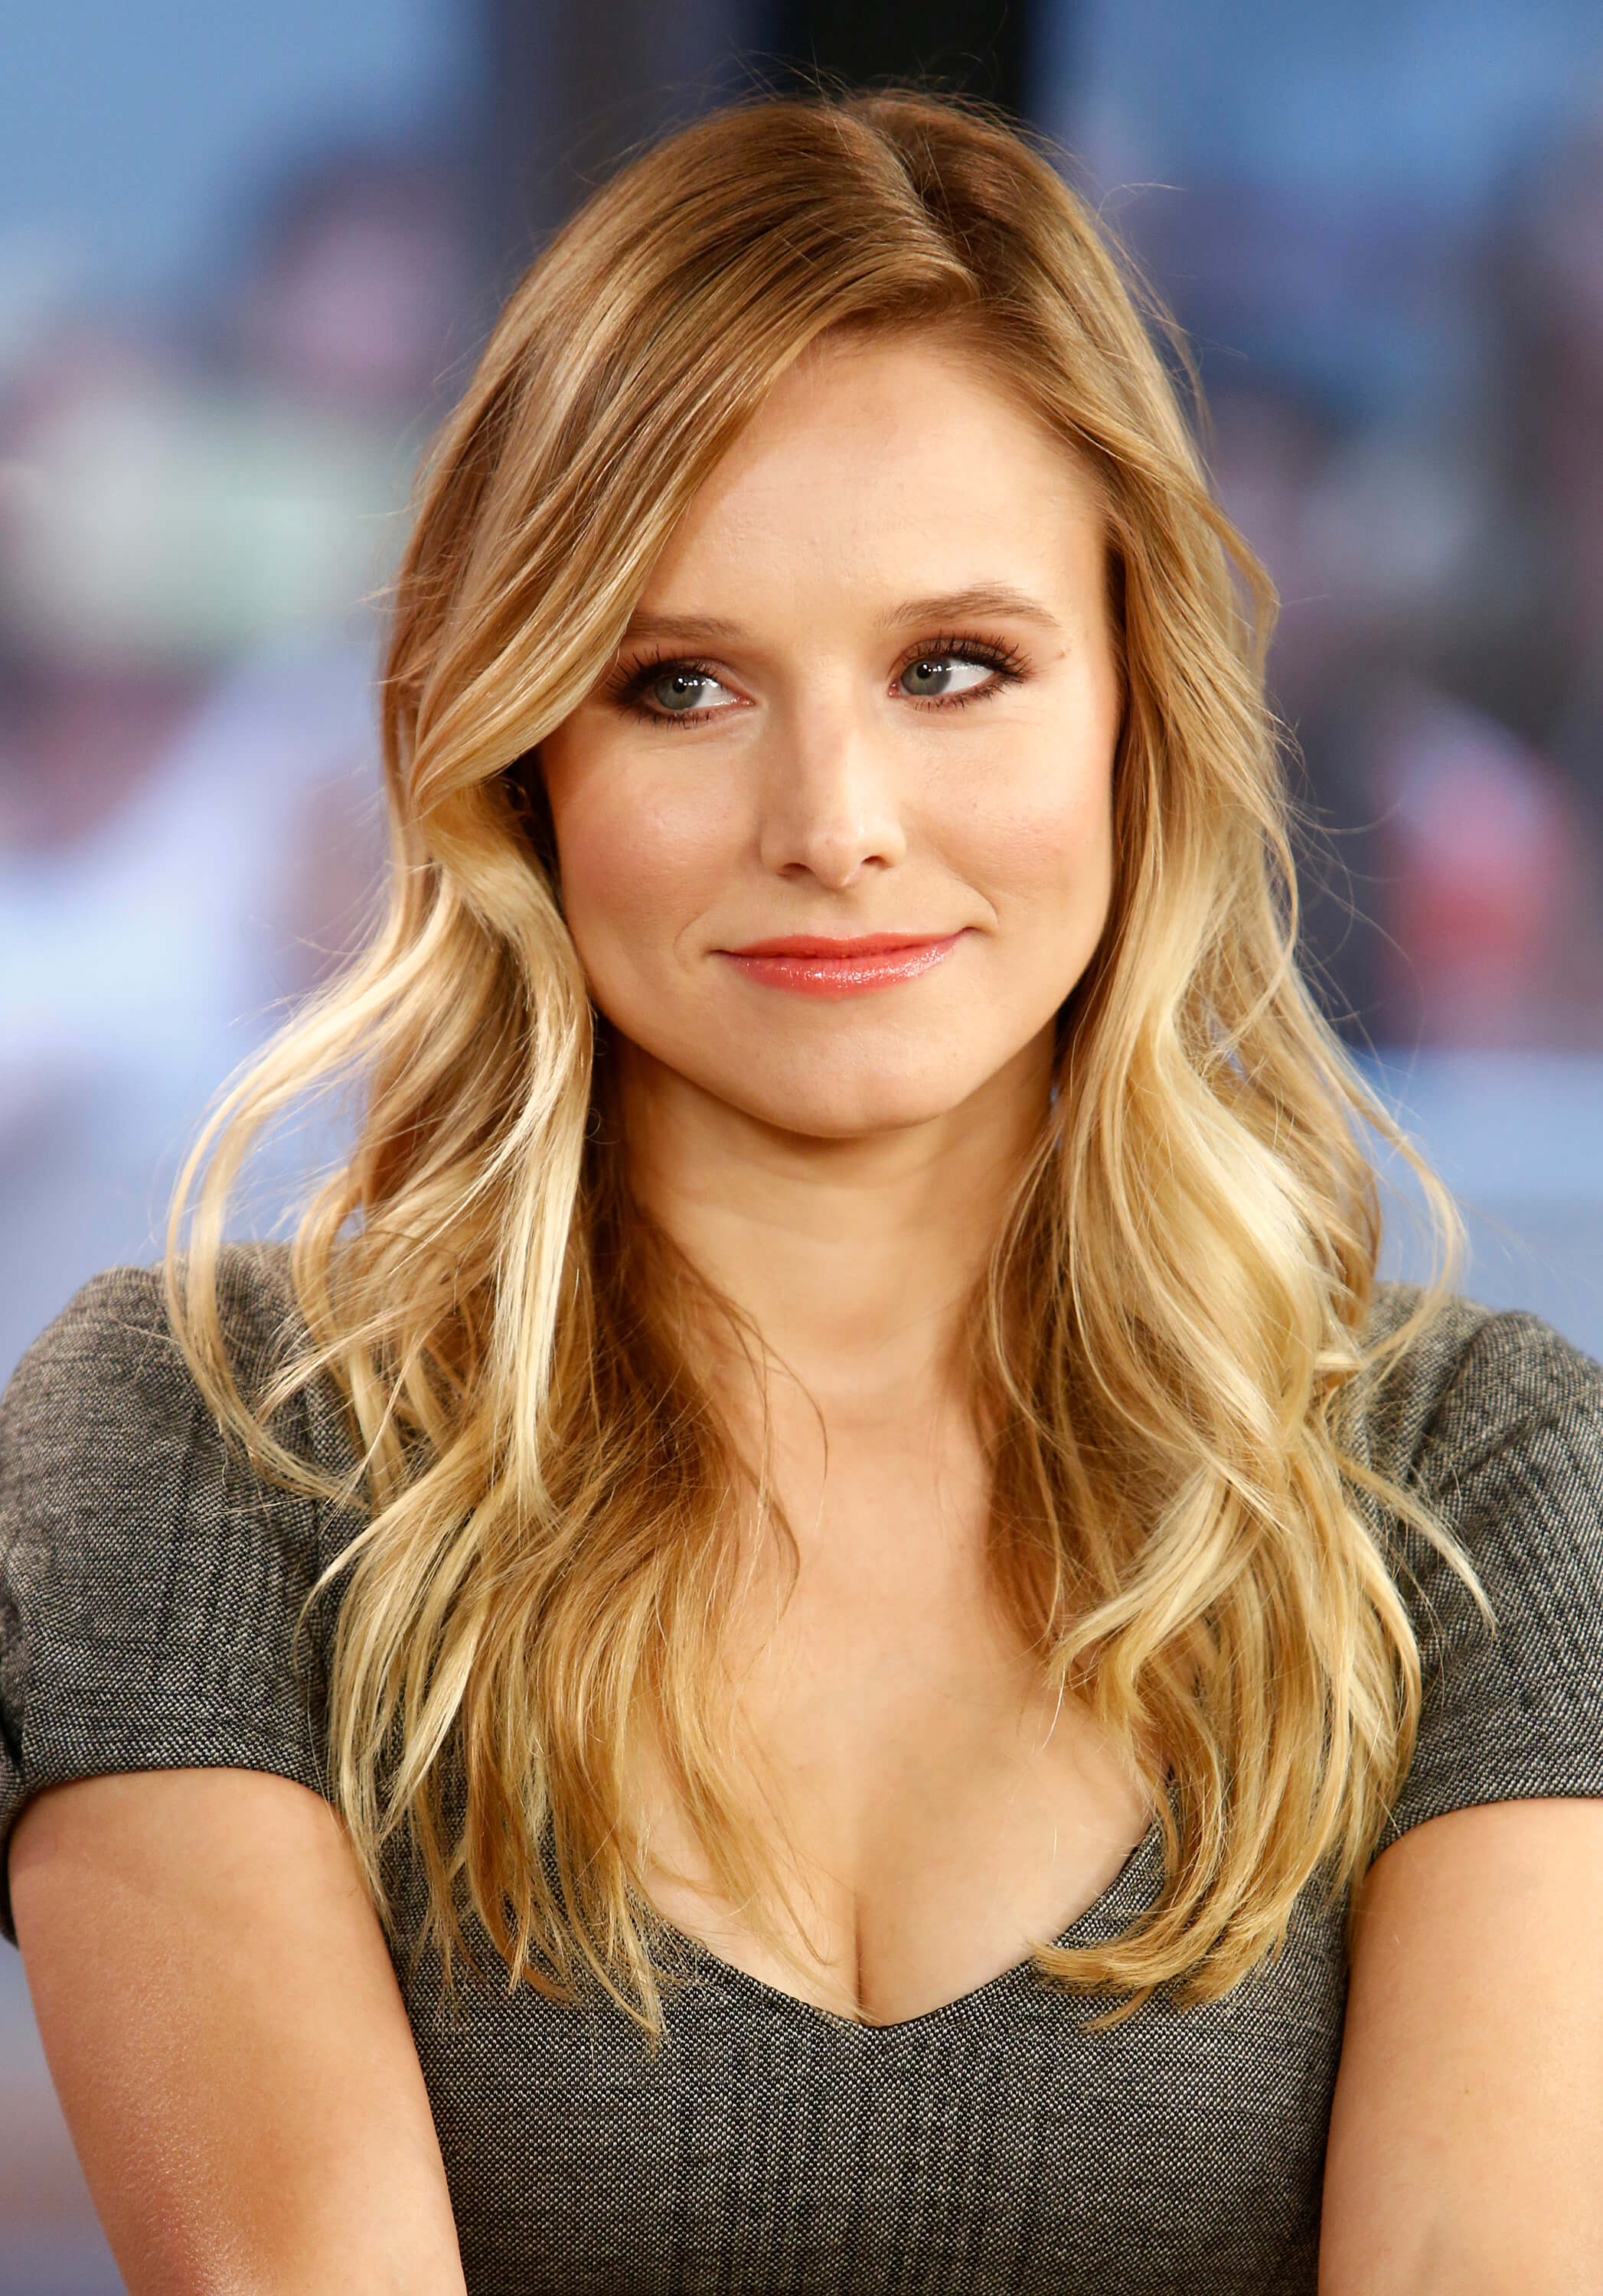 61 Sexy Kristen Bell Boobs Pictures That Will Make Your Heart Thump For Her | Best Of Comic Books